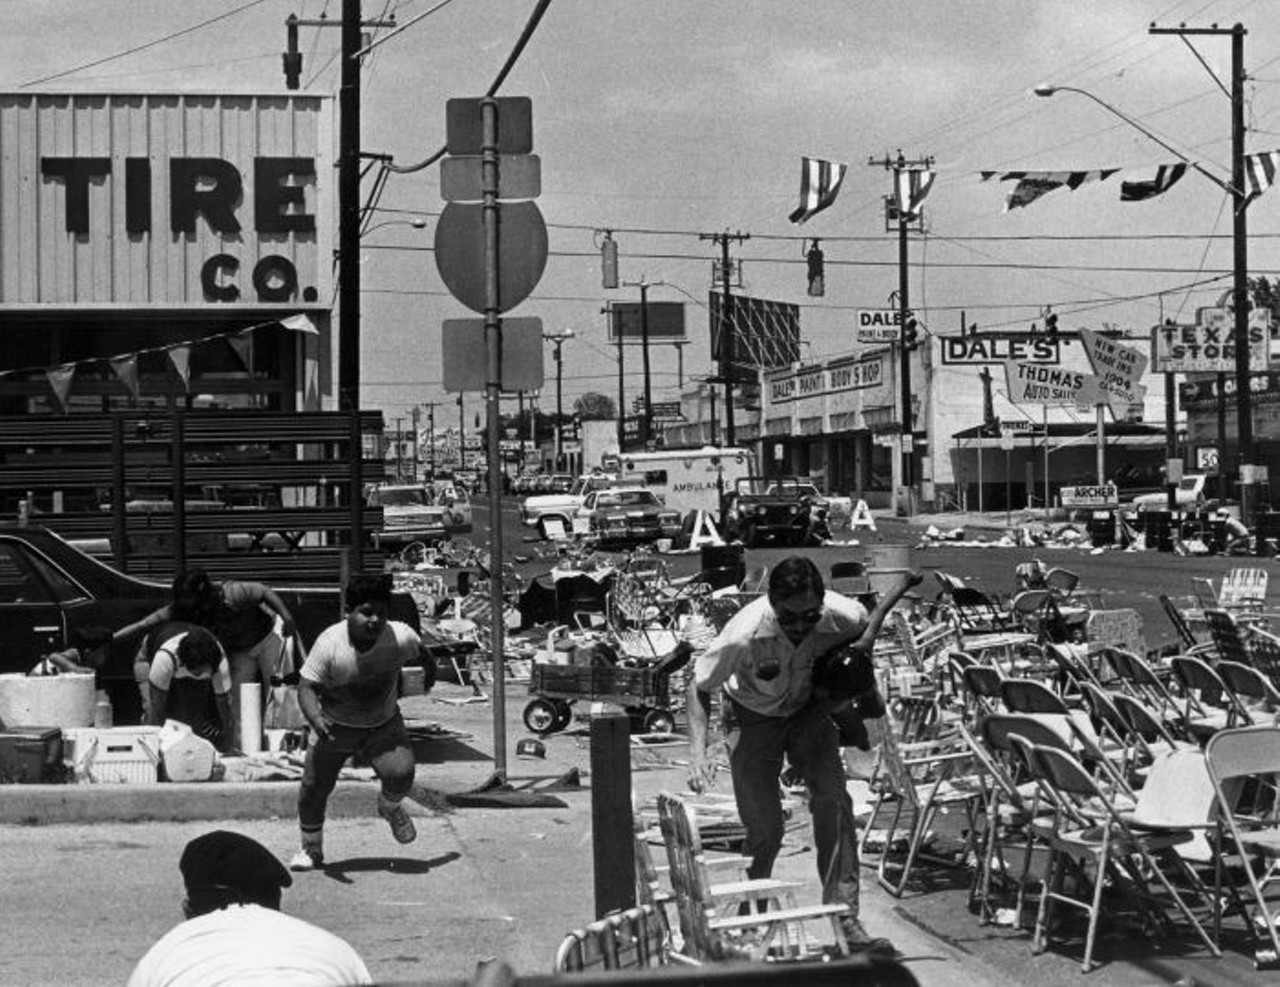 The Shooting at the 1979 Battle of Flowers Parade
April 27, 1979. The darkest Battle of Flowers parade in San Antonio history brough hysteria to the streets after a man – 64-year-old Ire Attebury – opened fire during the Fiesta celebration. The veteran had stockpiled guns and ammunition in his motor home parked nearby and shot throughout the scene for about 30 minutes. Initially he had shot six police officers, but by the end of the incident he had killed two women – Amelia Castillo and Ida Dollard – and injured more than 50 attendees. Attebury was later found inside the motor home. Investigators are still unsure whether his own bullet or a shot from an officer was the one that killed him.
Photo by Al Guzman for San Antonio Light